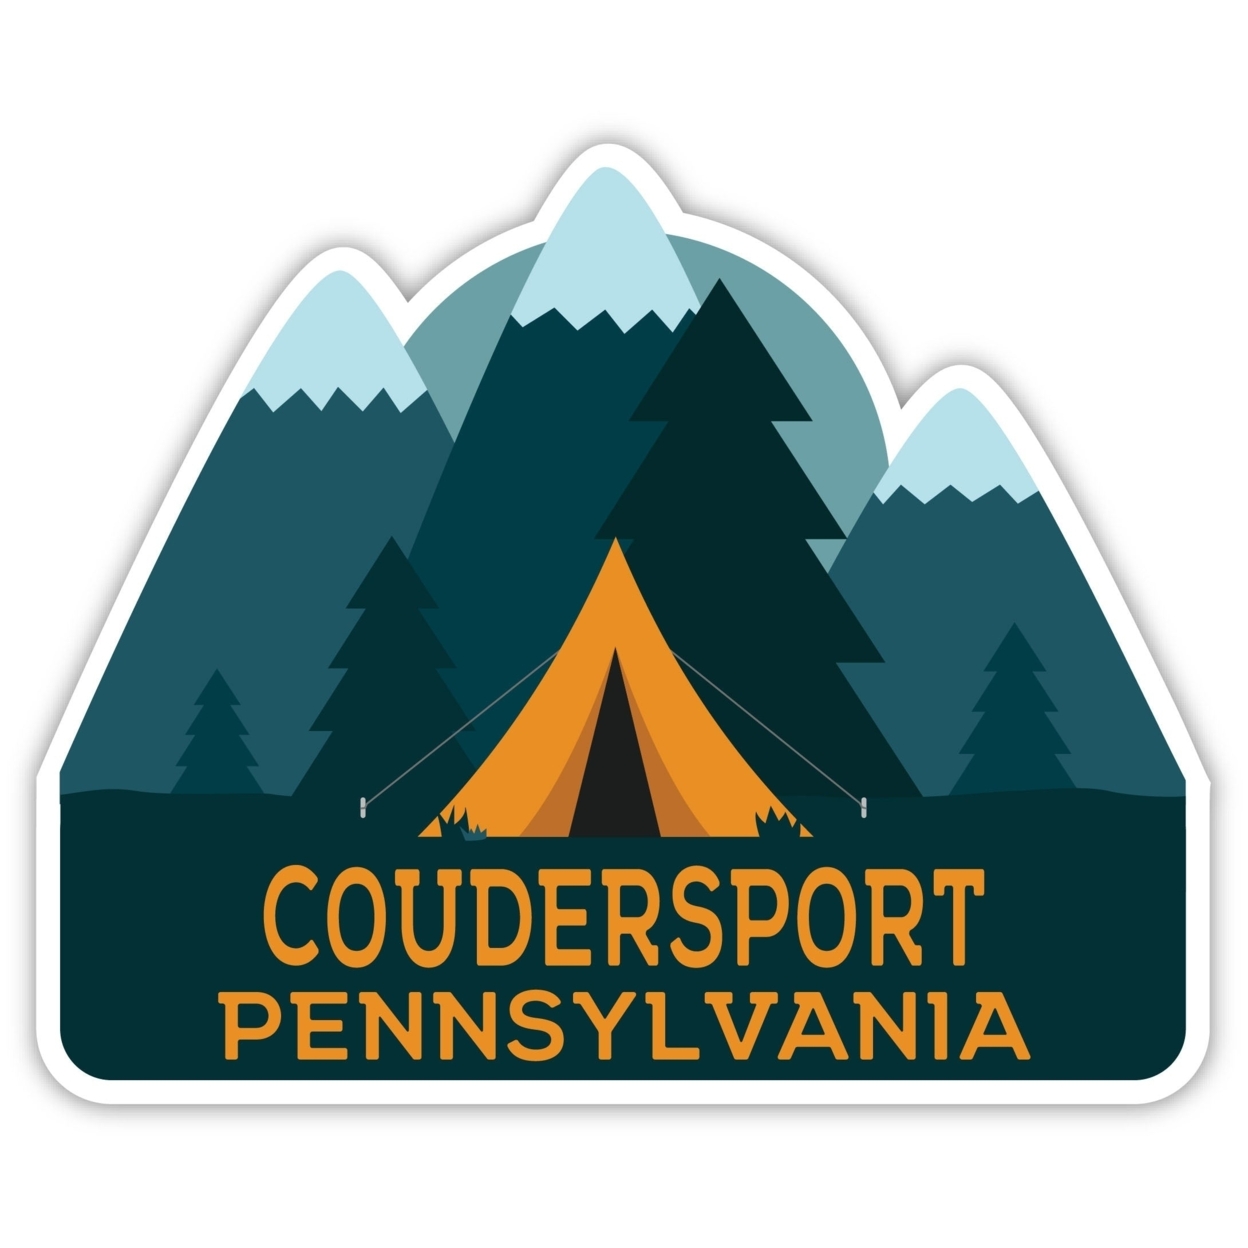 Coudersport Pennsylvania Souvenir Decorative Stickers (Choose Theme And Size) - 4-Pack, 12-Inch, Tent